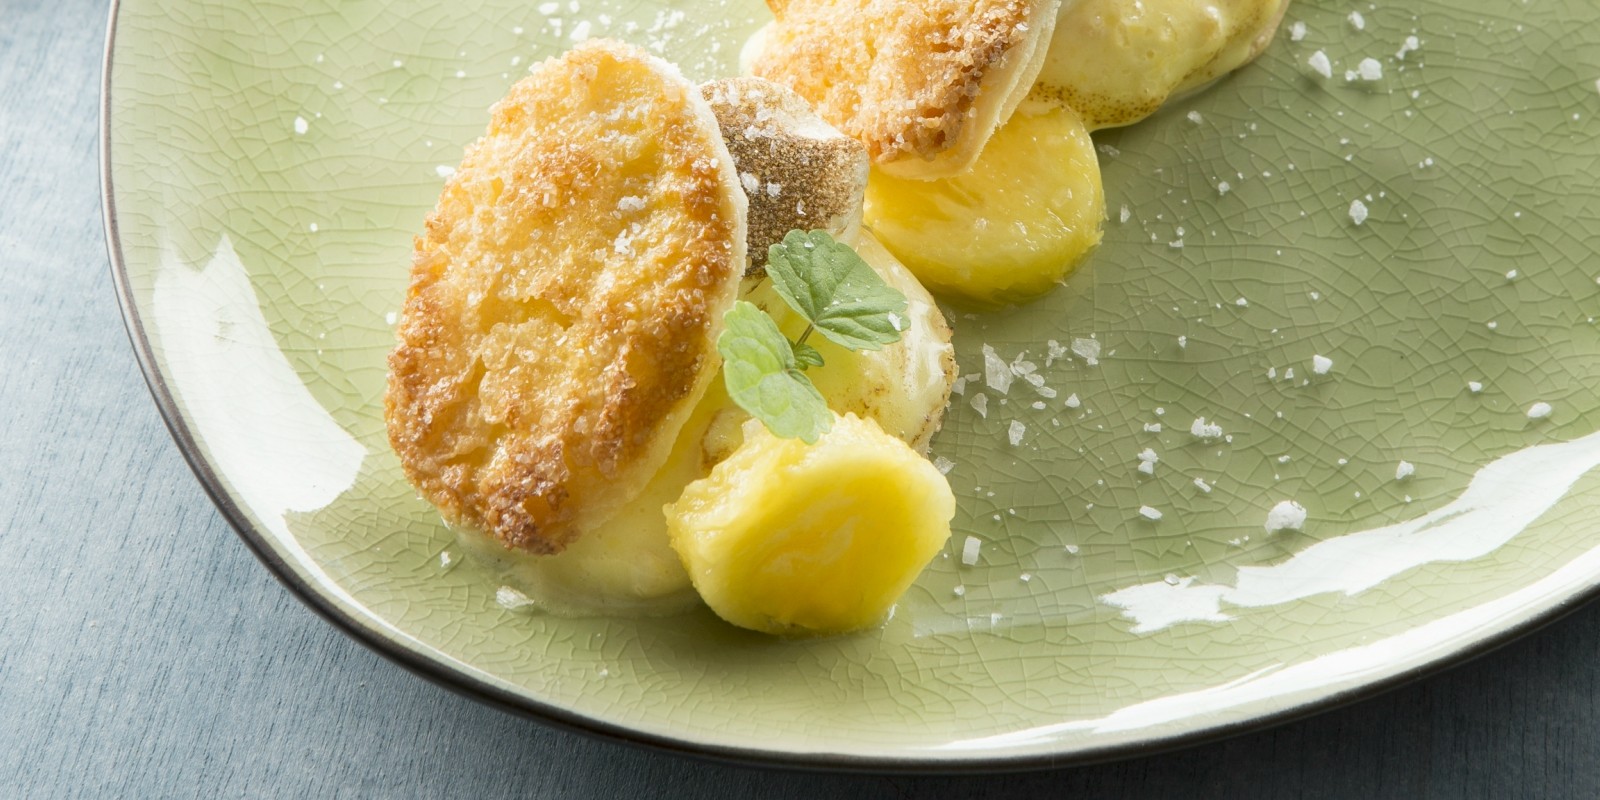 Belberry recipe: PINEAPPLE, YELLOW CREAM AND PUFF PASTRY BISCUITS